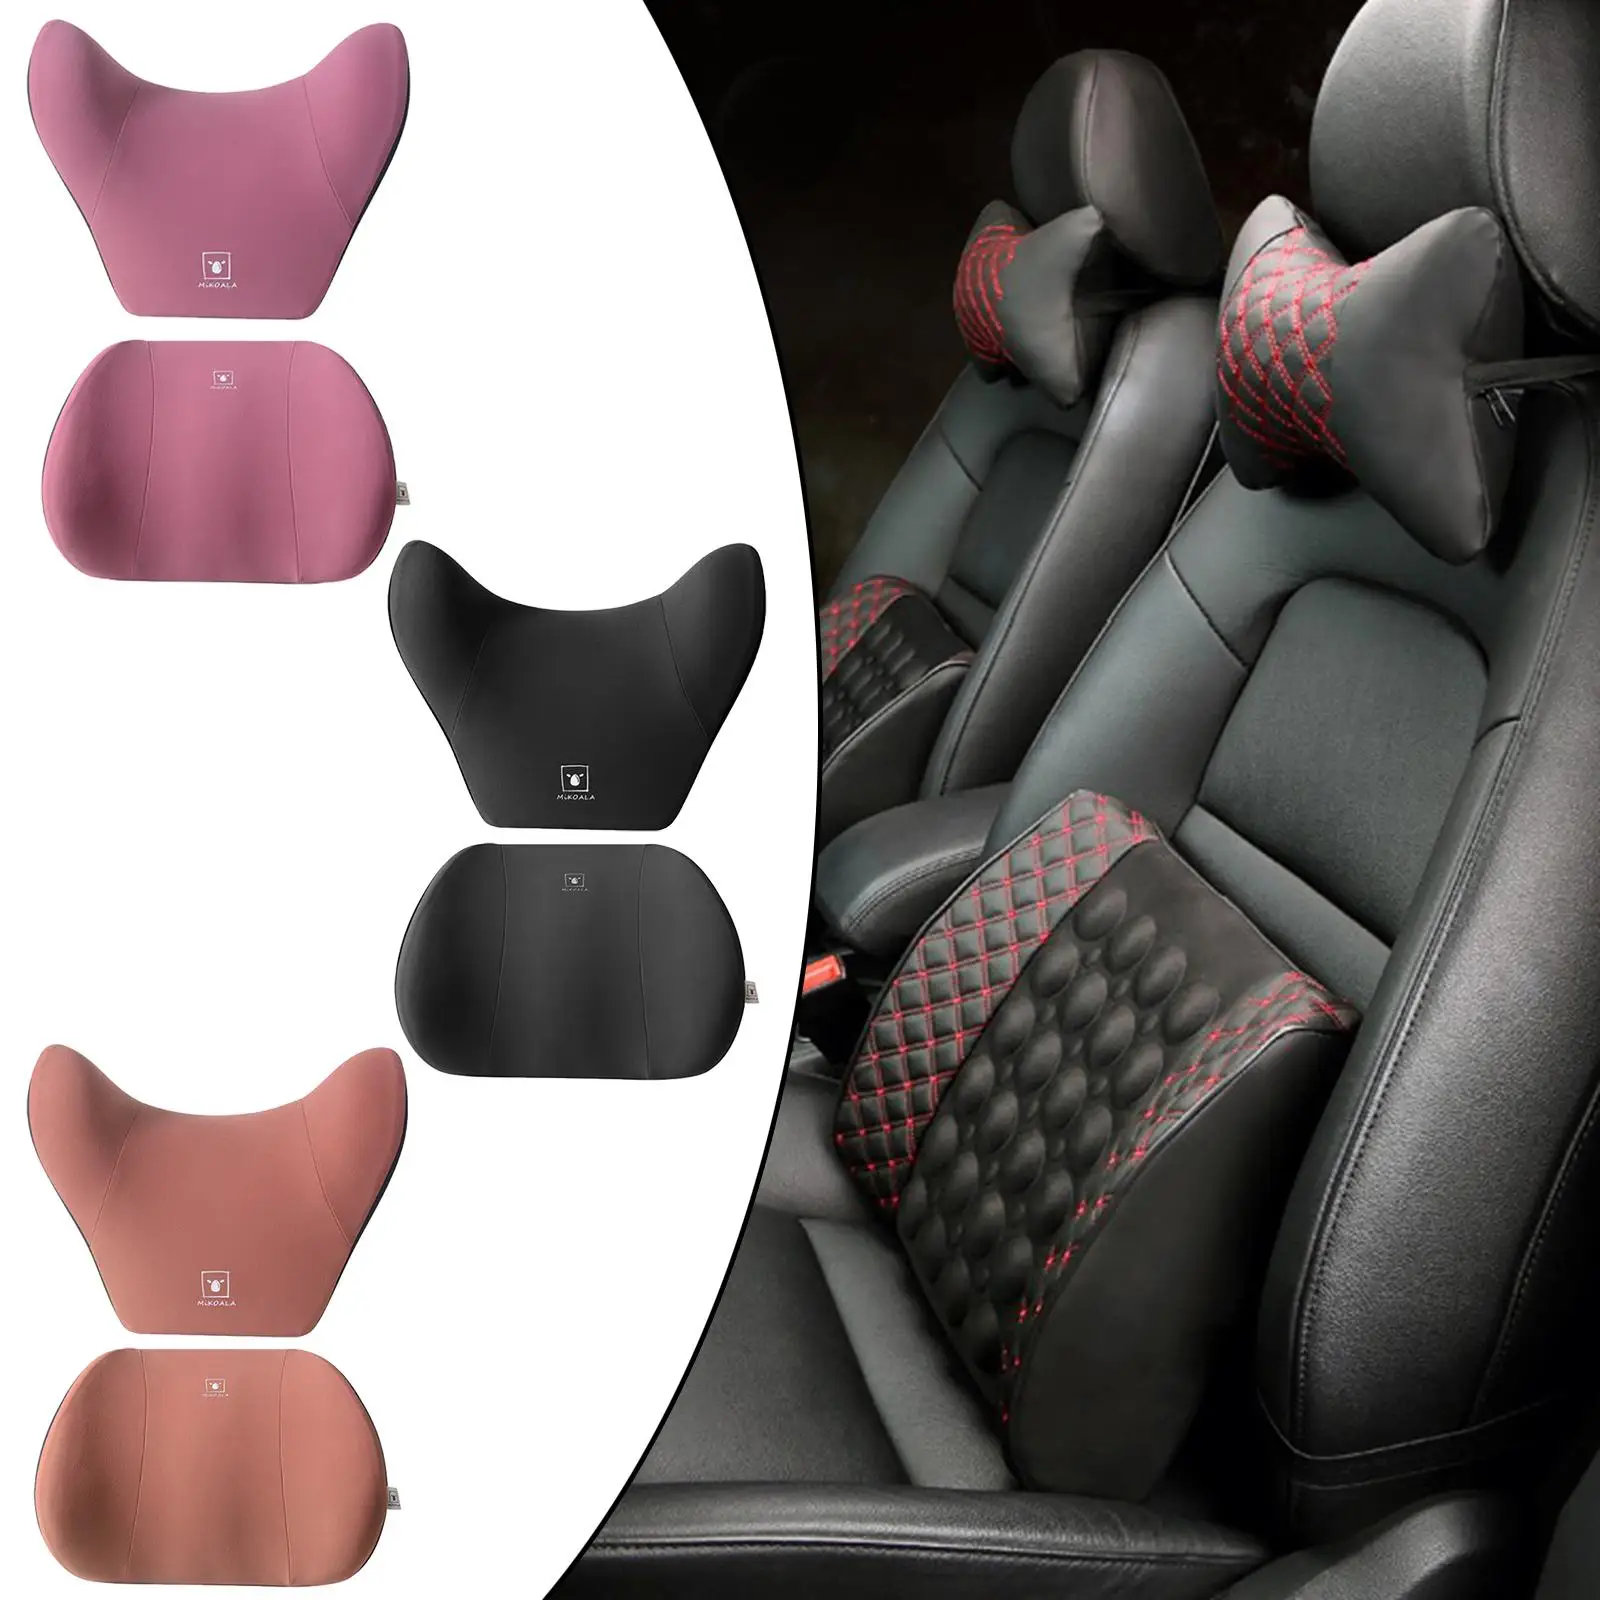 Headrest and  Support Back Cushion Kit, Pad for Car  Your Neck and Back  Cushions for 